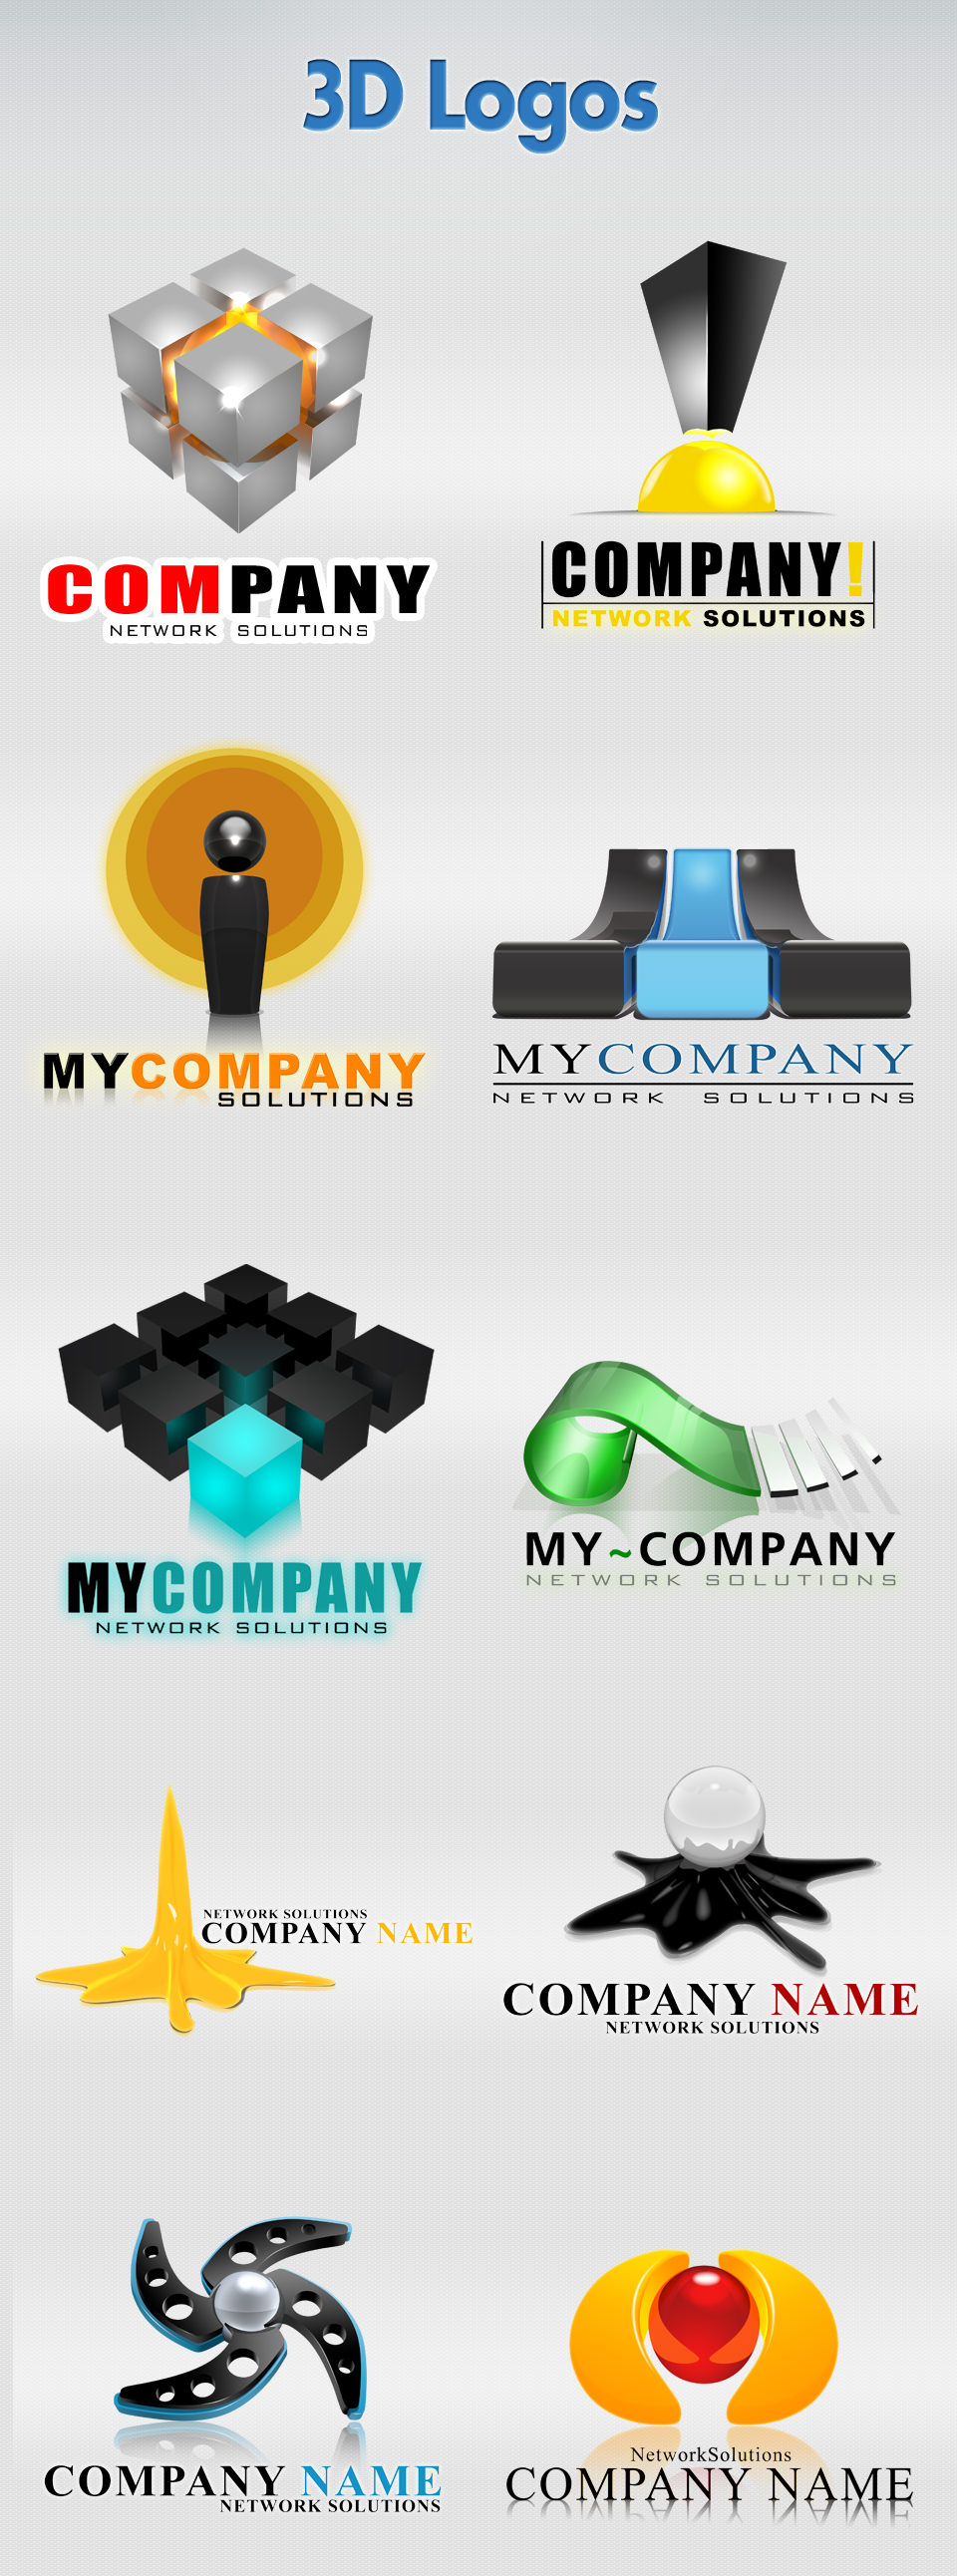 Download FREE 19+ Realistic 3D Logo Psd Mockups in PSD | InDesign | AI